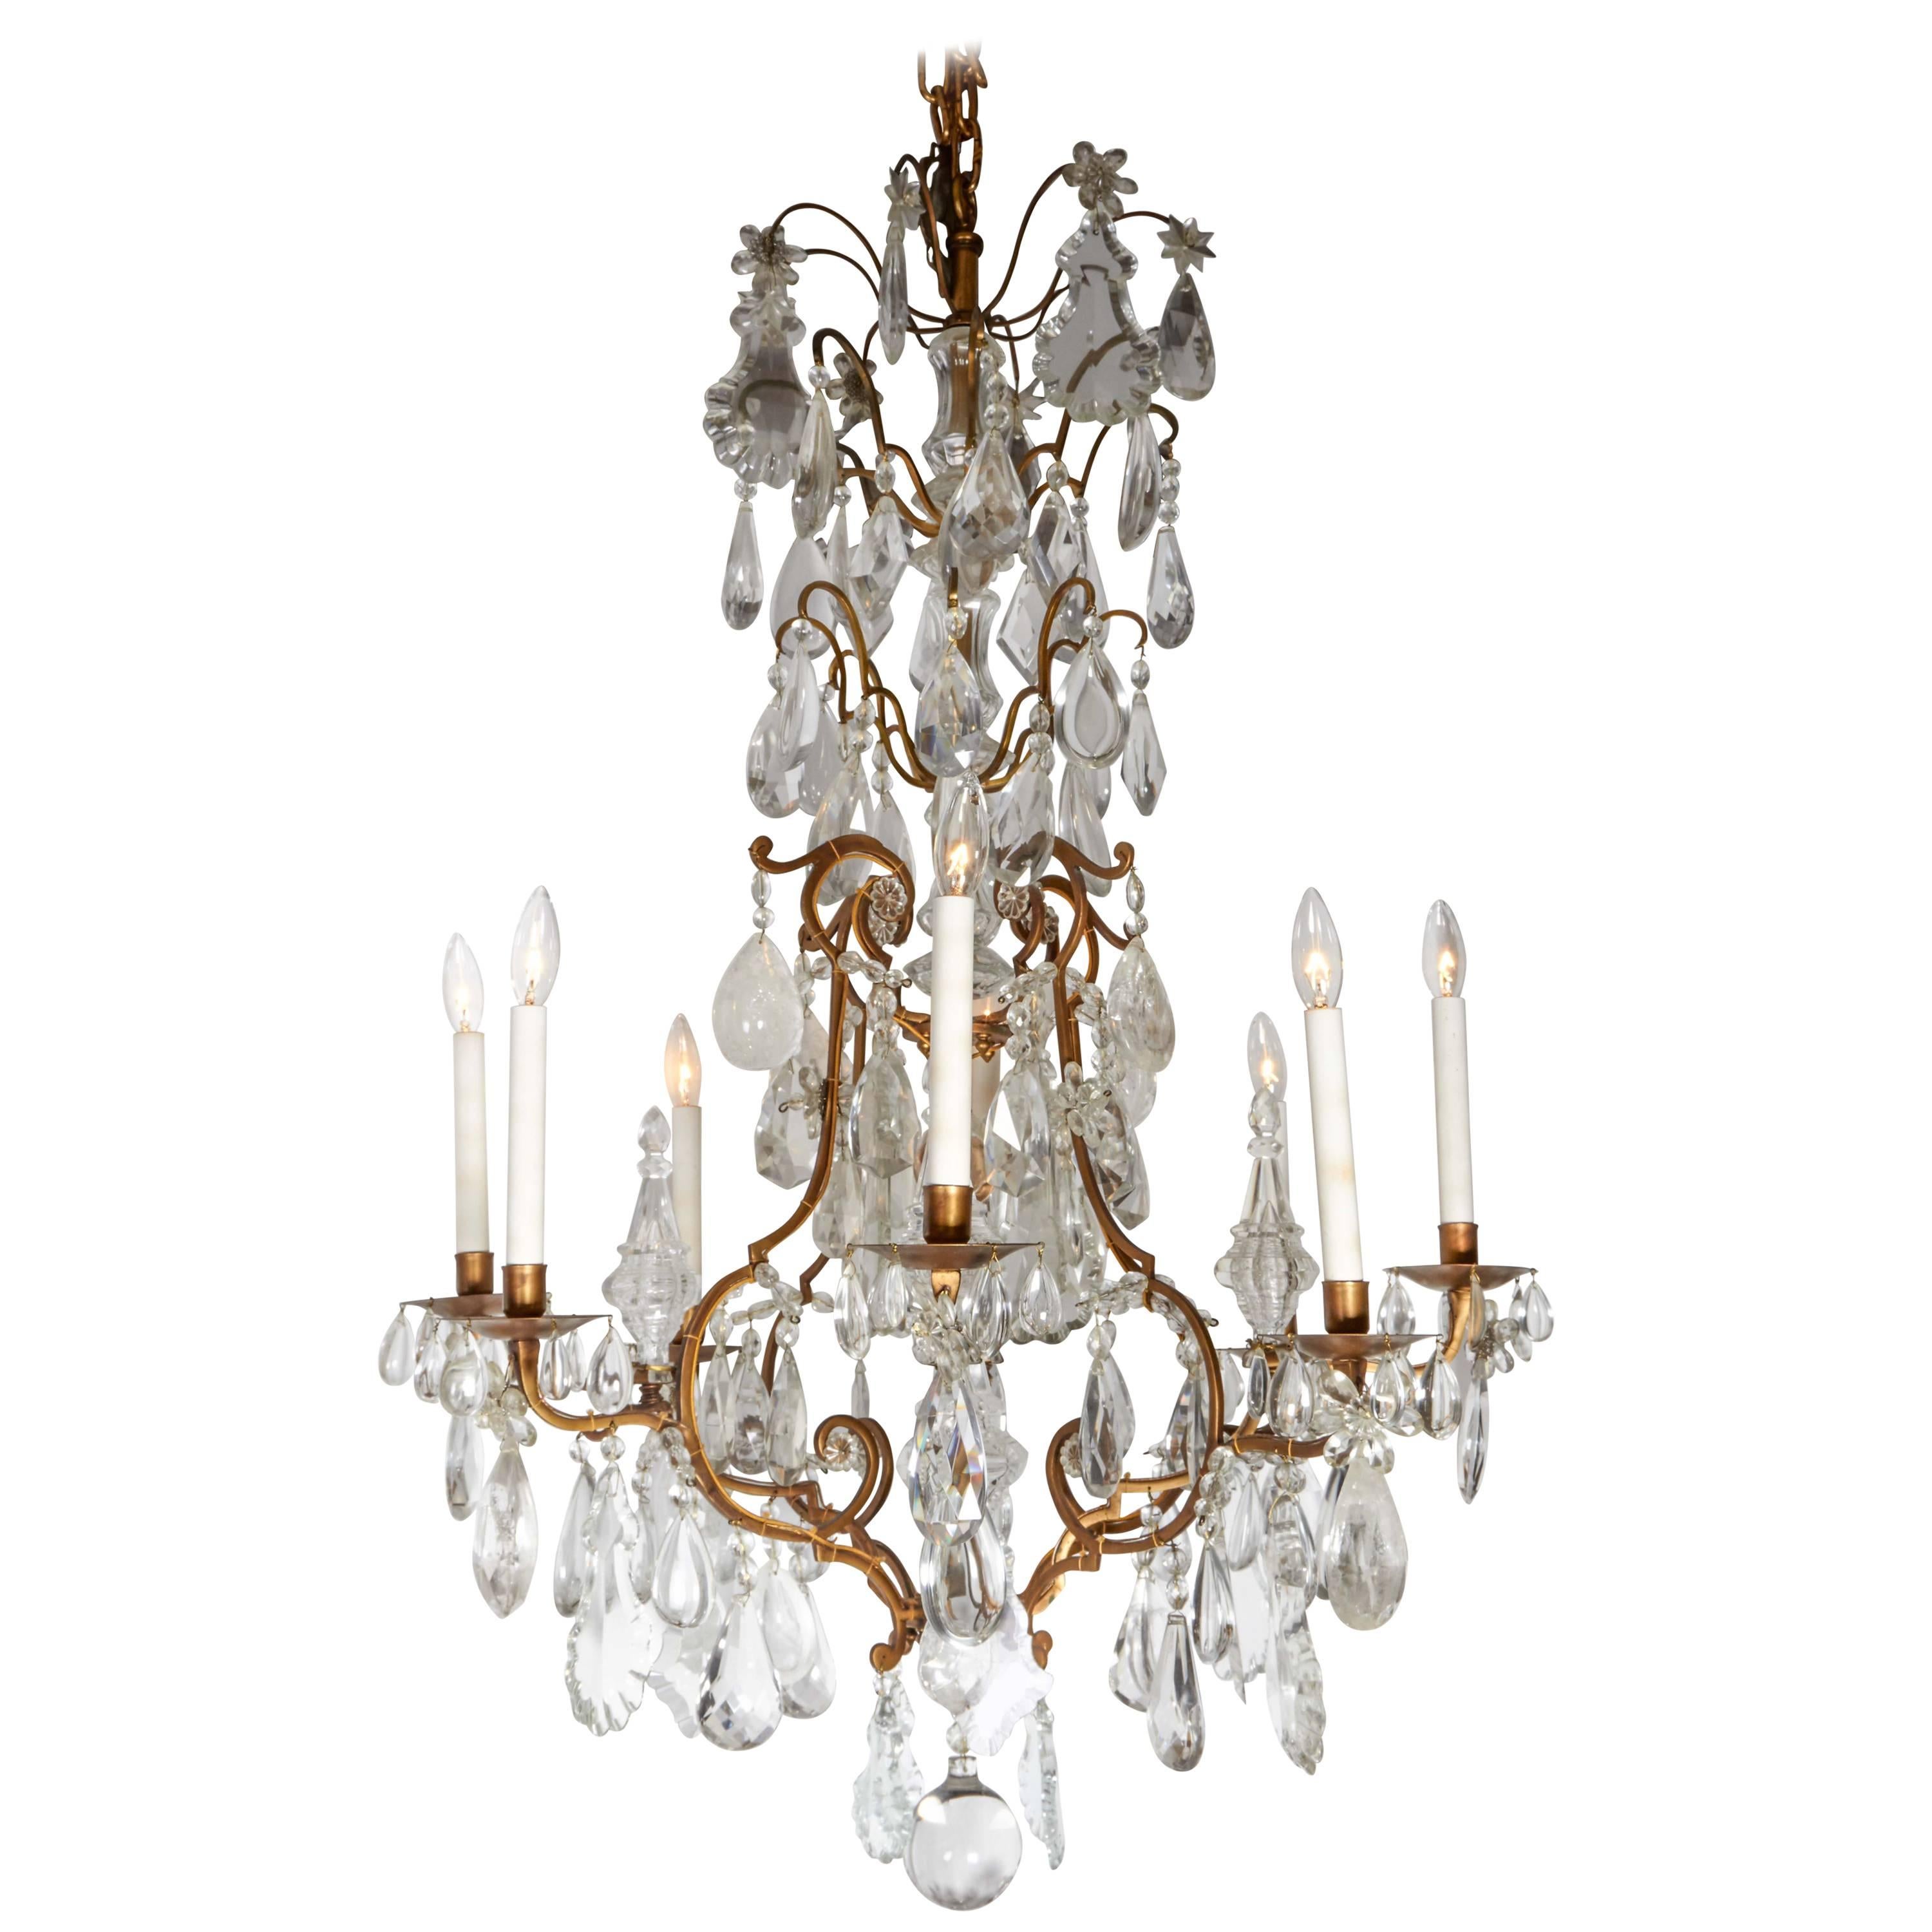 Impressive Louis XV Style Gilt Bronze and Rock Crystal Chandelier